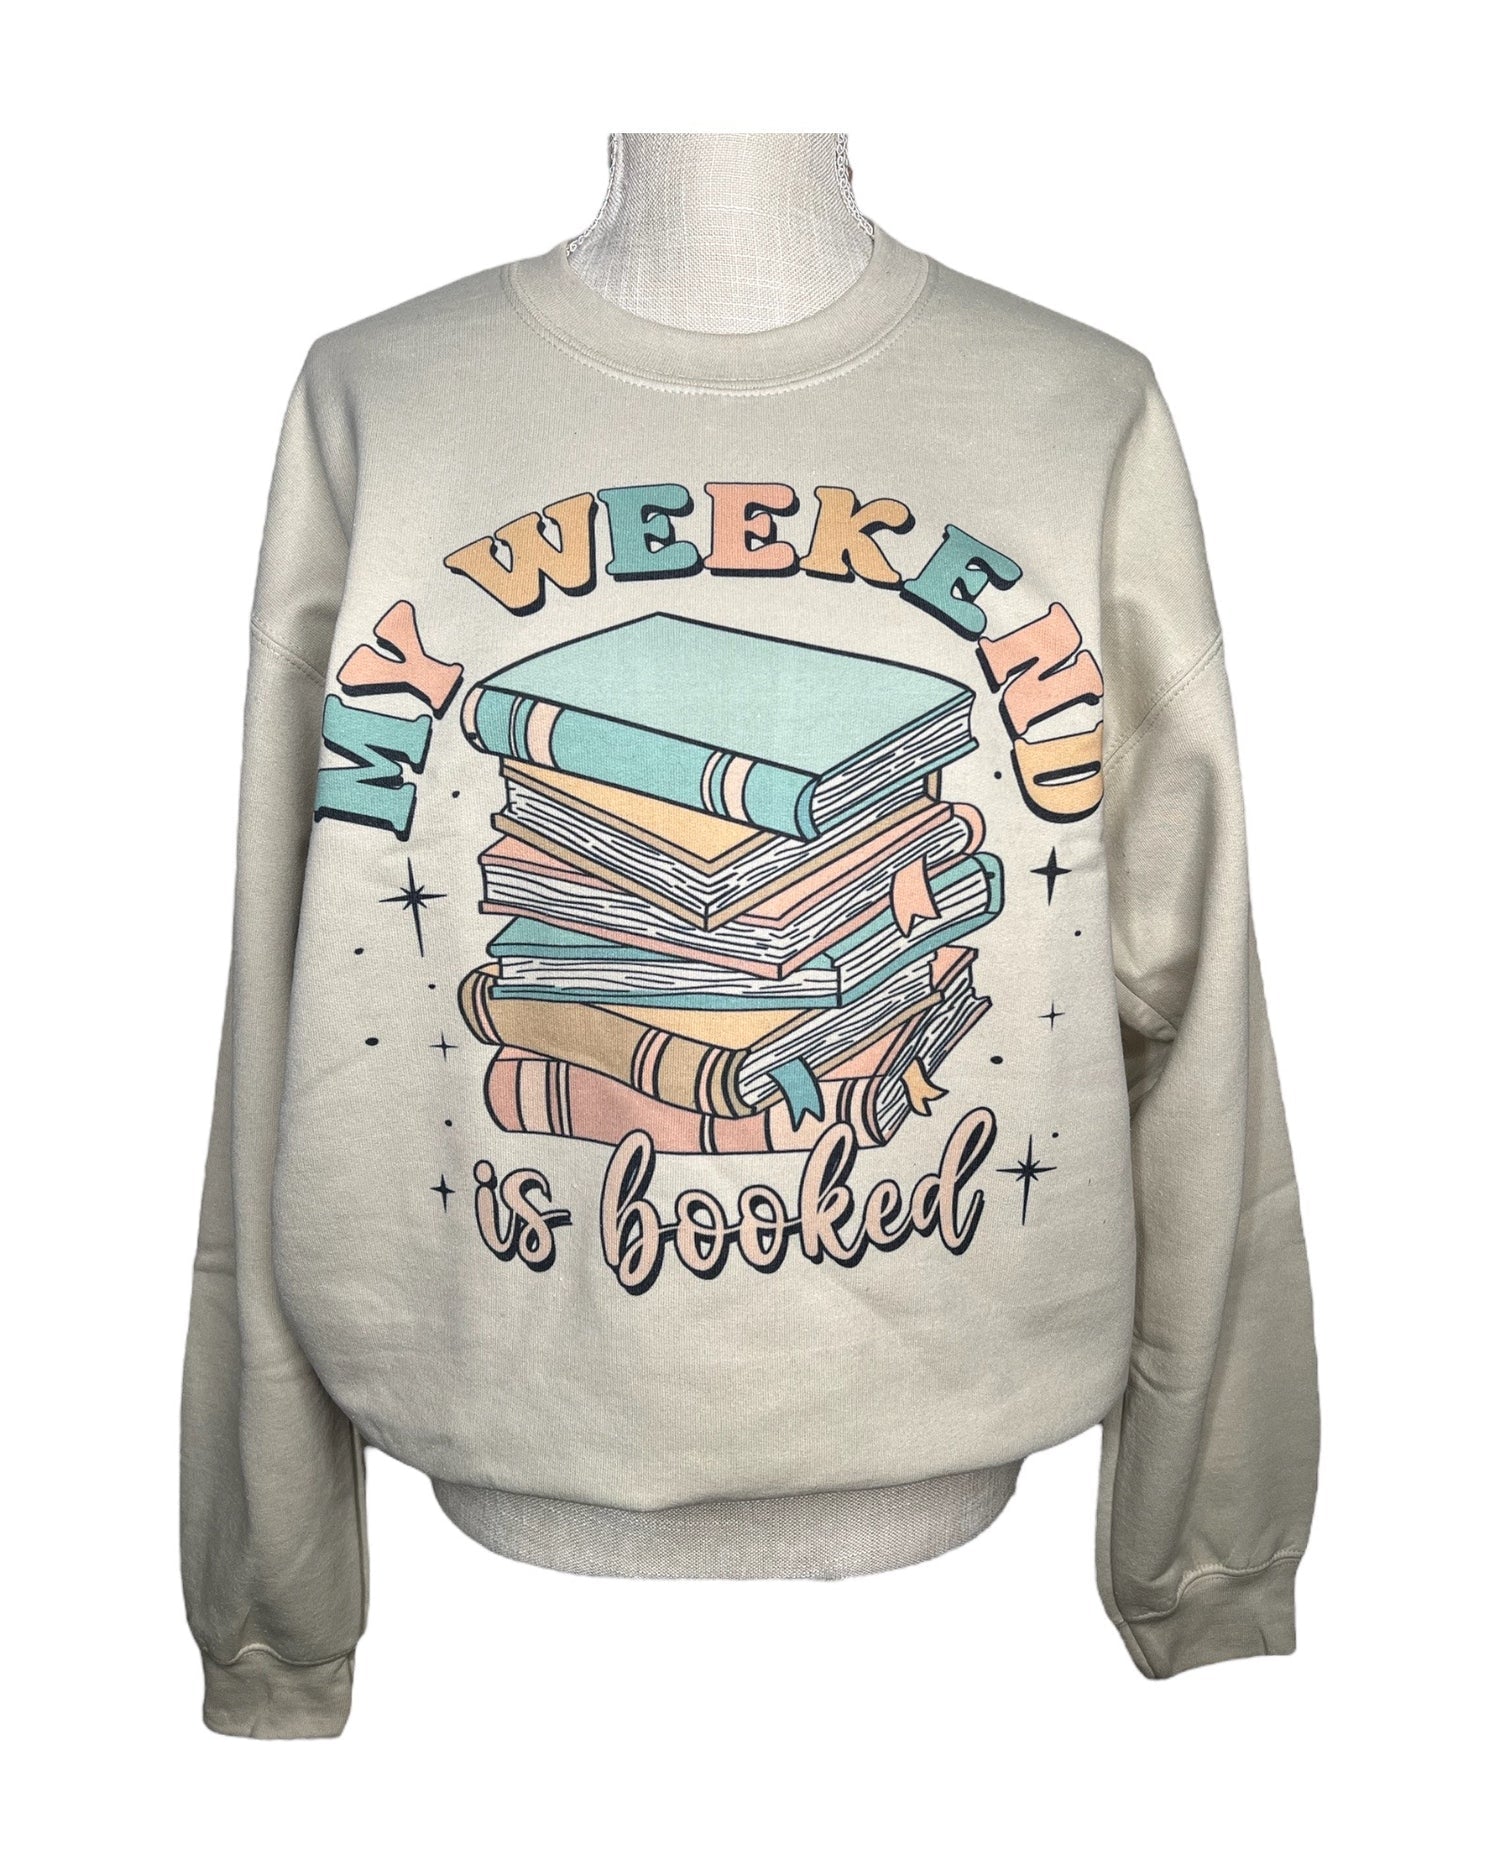 Stay Cozy With 'My Weekend Is All Booked' Sweatshirt